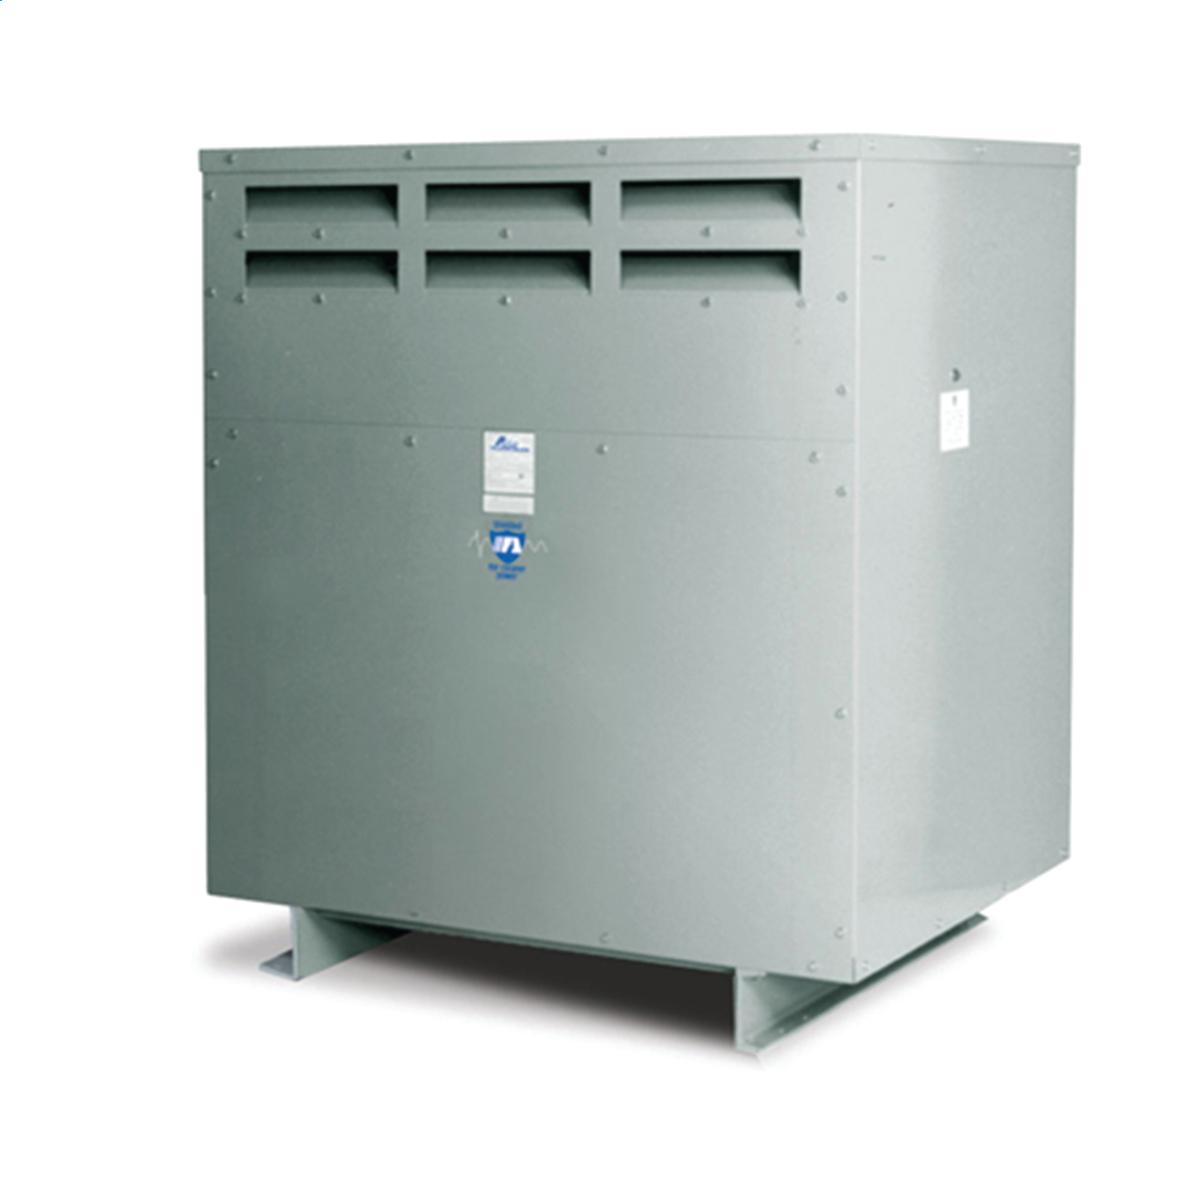 Hubbell WI002M12 Medium Voltage Transformer - Three Phase, 2400Δ - 480ΔV, 2000kVA  ; Lower operating cost over Liquid-filled ; No additional fireproofing or venting ; Long life expectancy ; Smaller, lighter easy to maintain